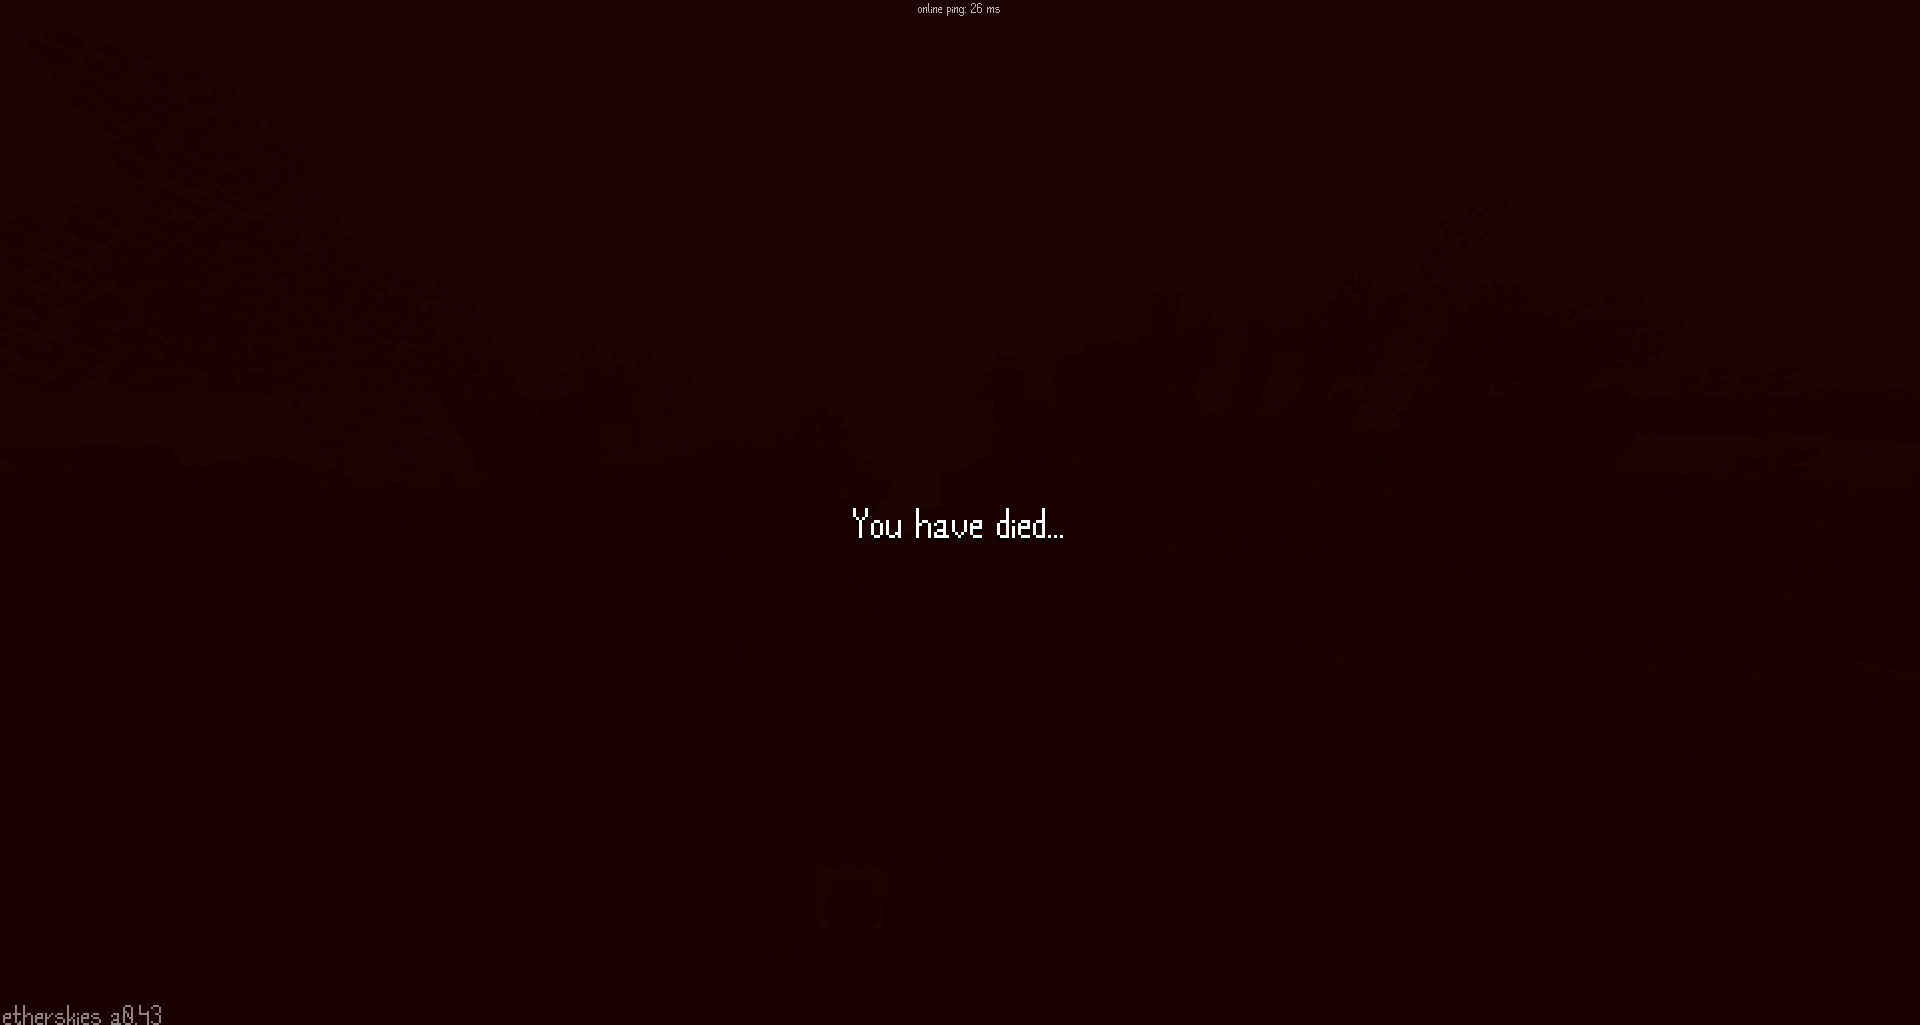 the new death screen